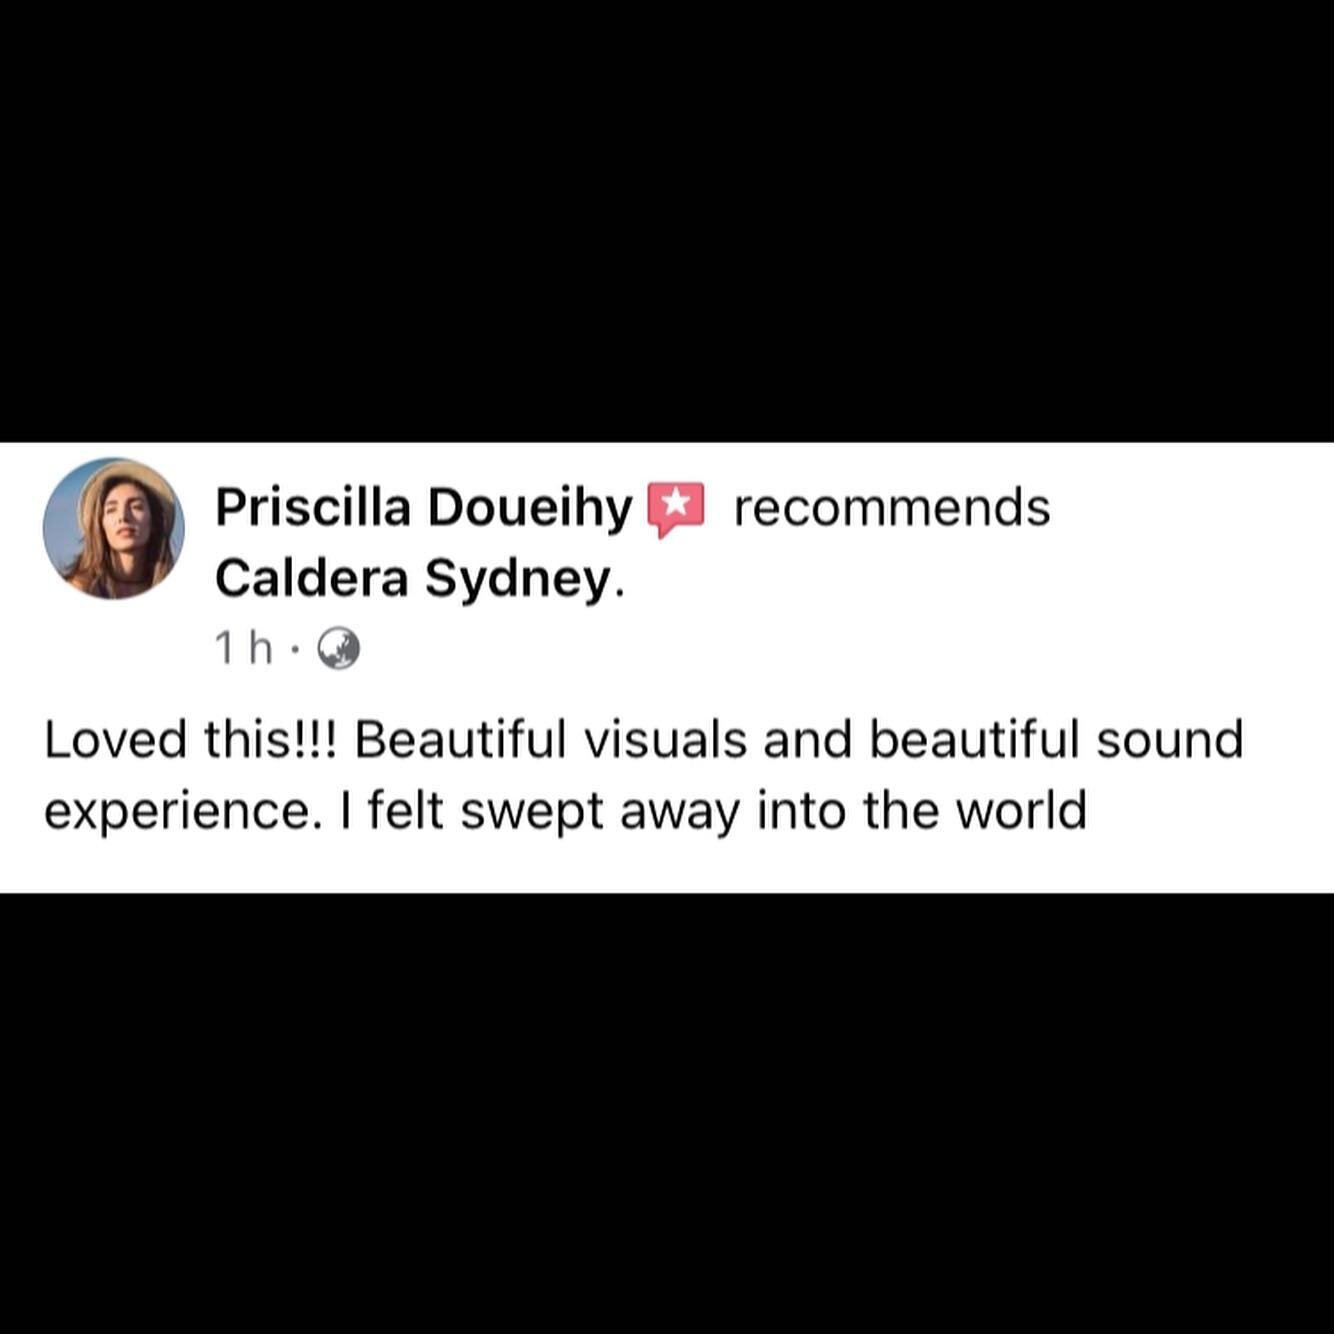 A selection of audience reviews for Caldera 360. Thanks to everyone who has checked it out so far - everyone else, head to https://360.caldera.sydney for half an hour of exploring 🔥
.
.
.
#reviews #online #digitalart #immersive #360 #exhibition #cal